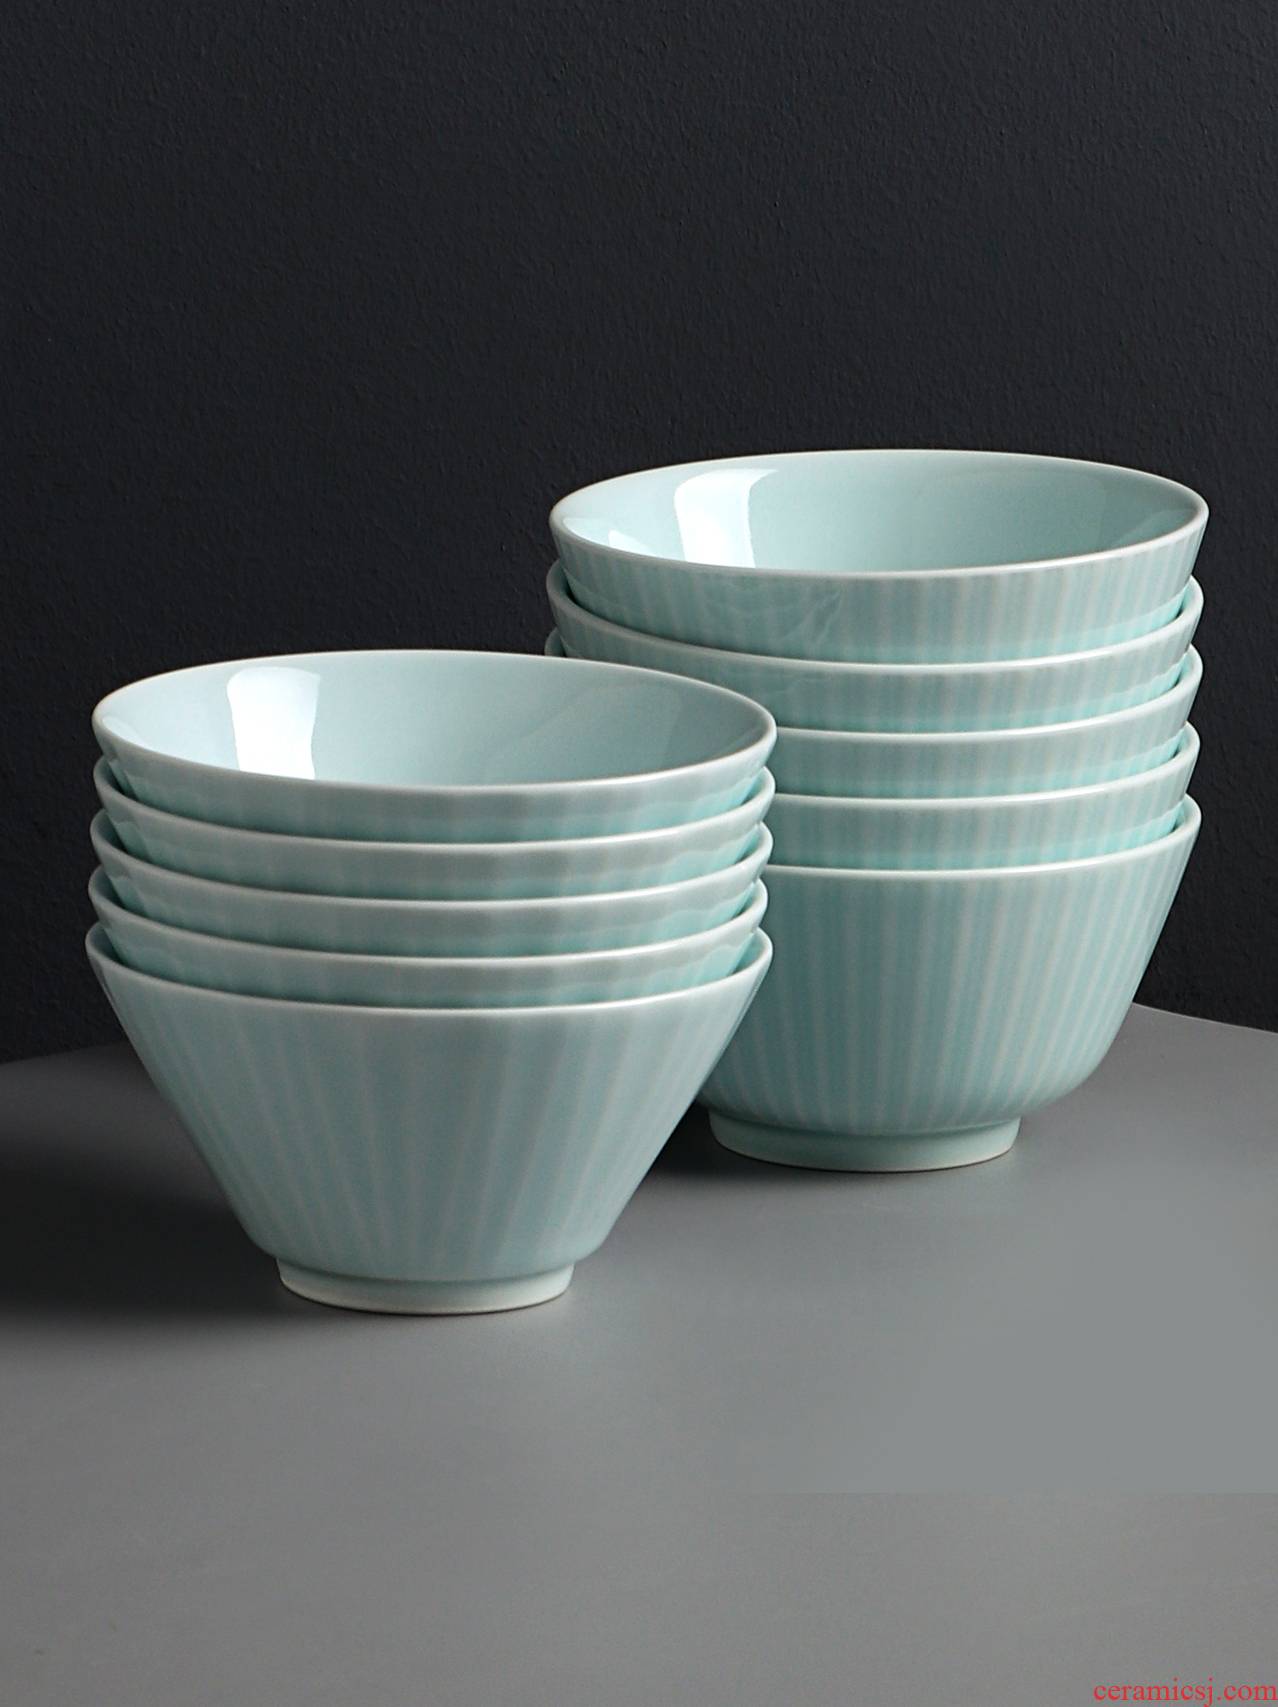 Jingdezhen shadow celadon bowls of Chinese style household tableware to eat bread and butter rice bowls a single creative ceramic bowls hat to bowl